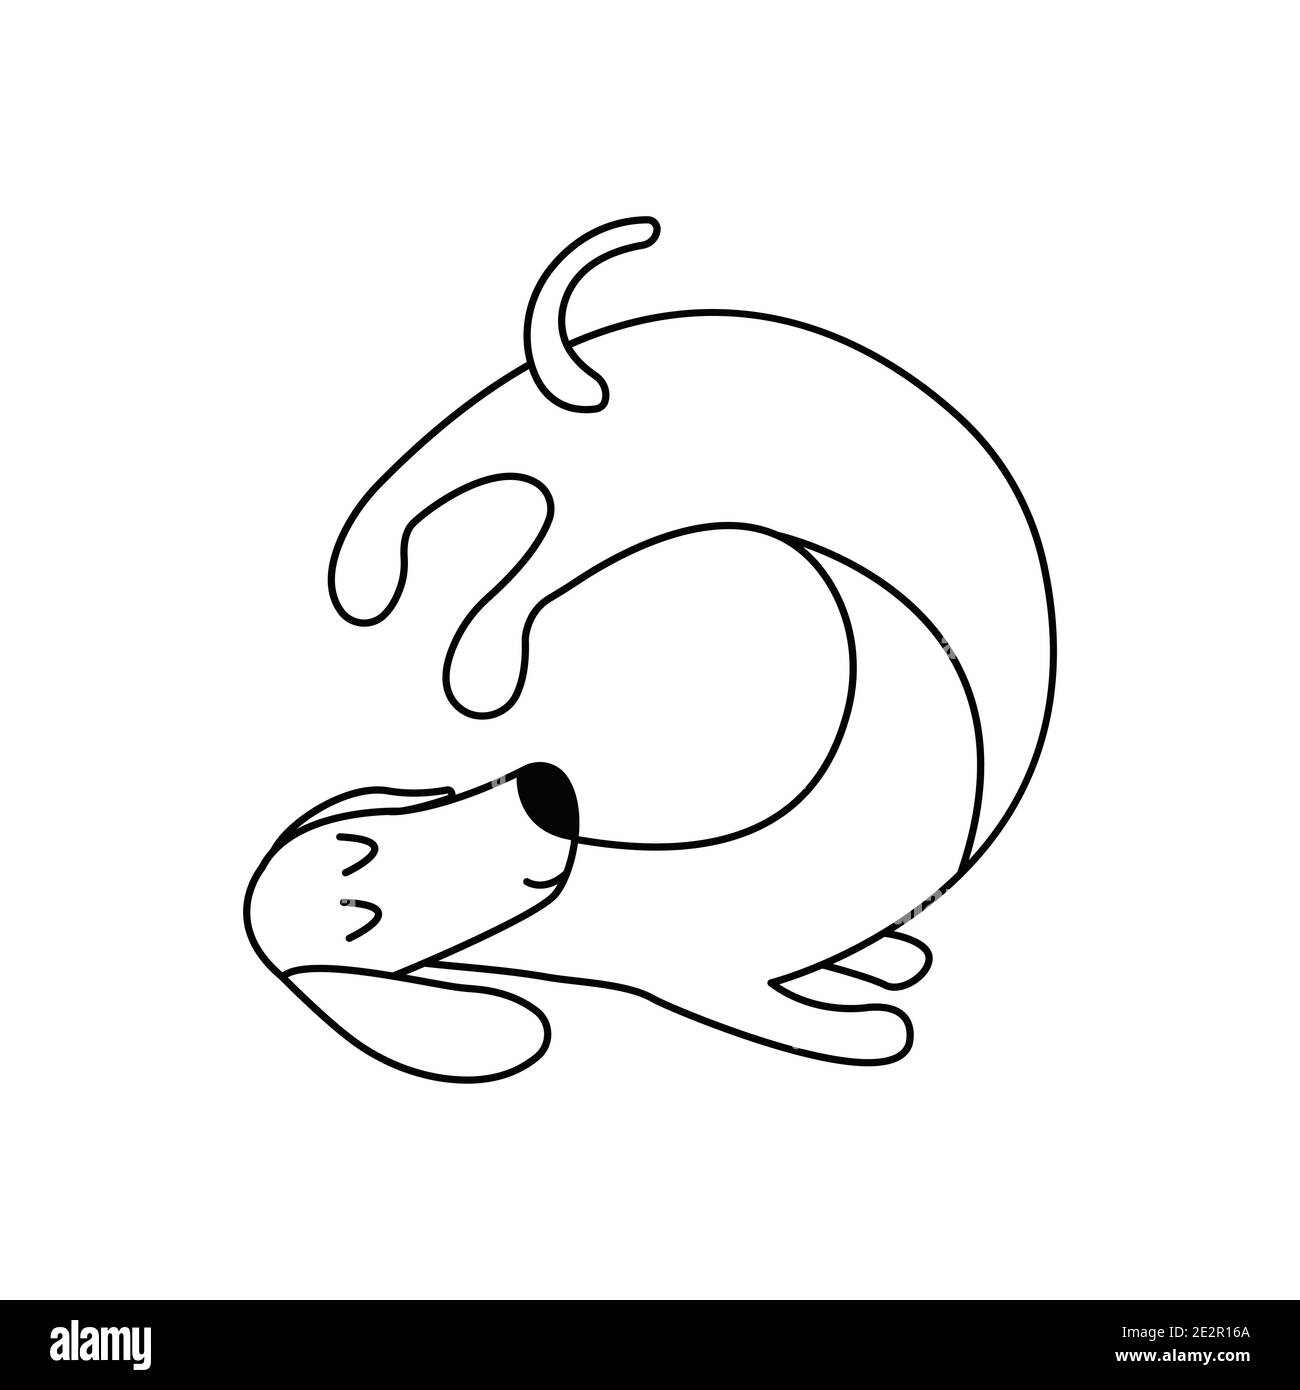 Dachshund practices yoga and meditates. Yoga dog, relaxation and sports. Vector isolated doodle illustration. Hand drawn animal black and white Stock Vector